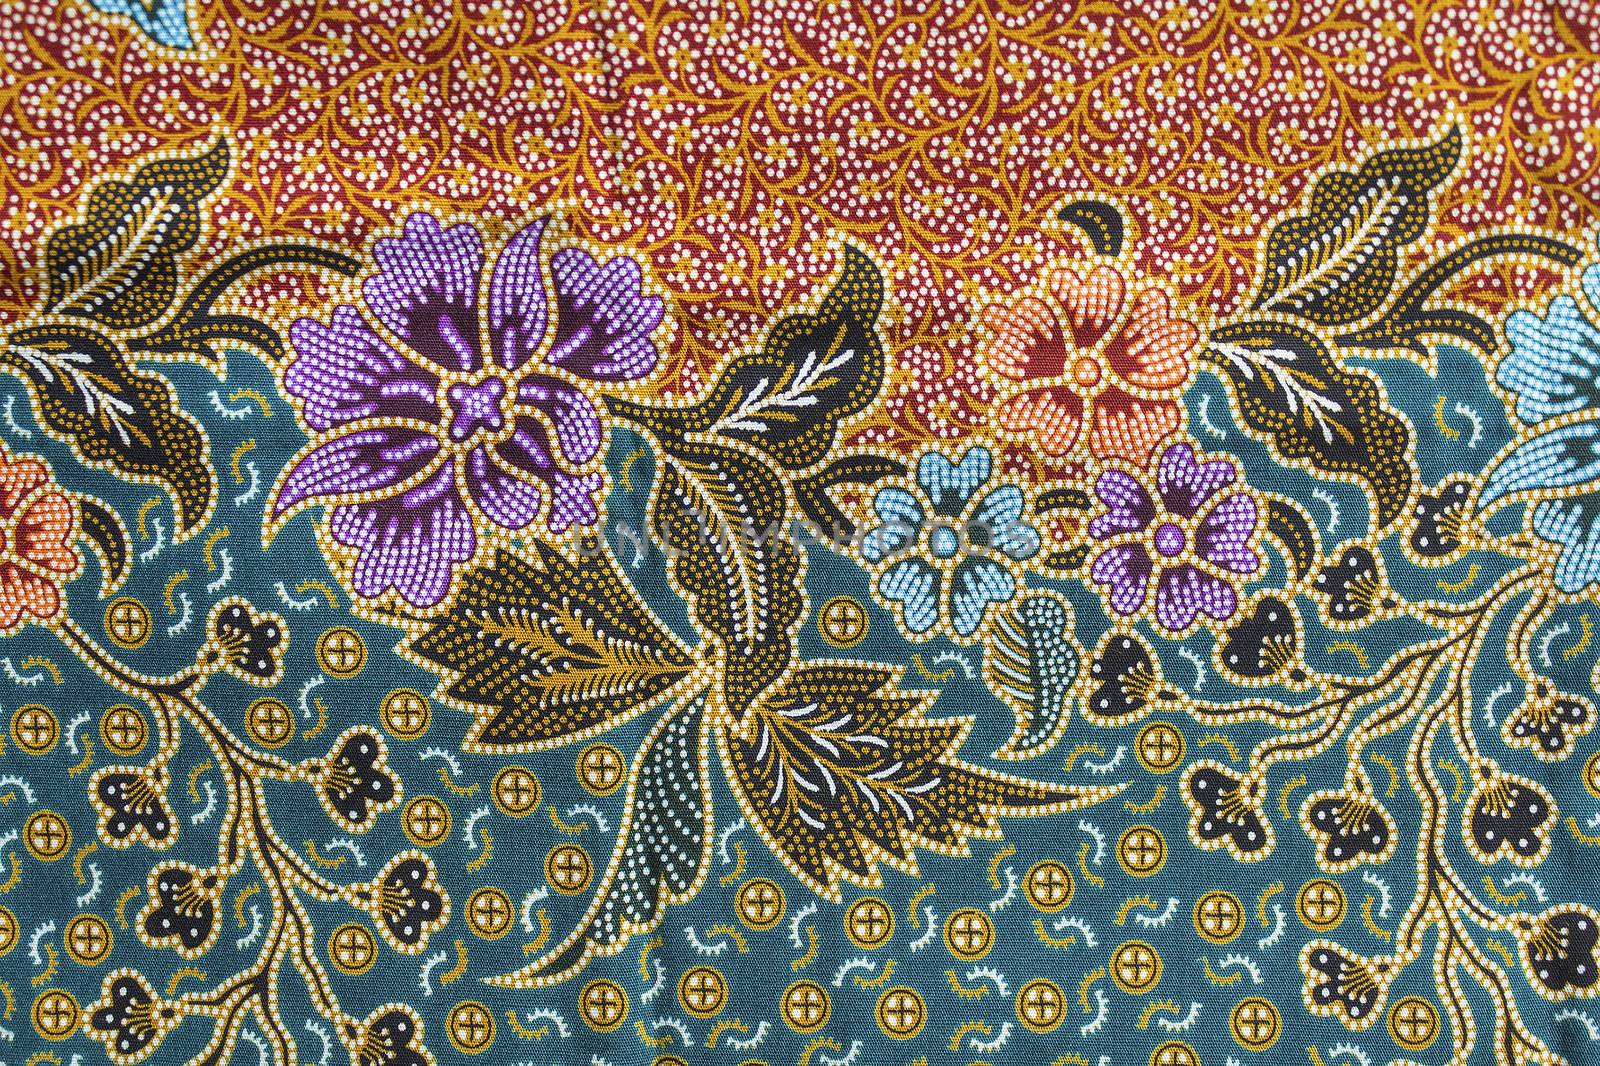 Texture of thai fabric by olovedog